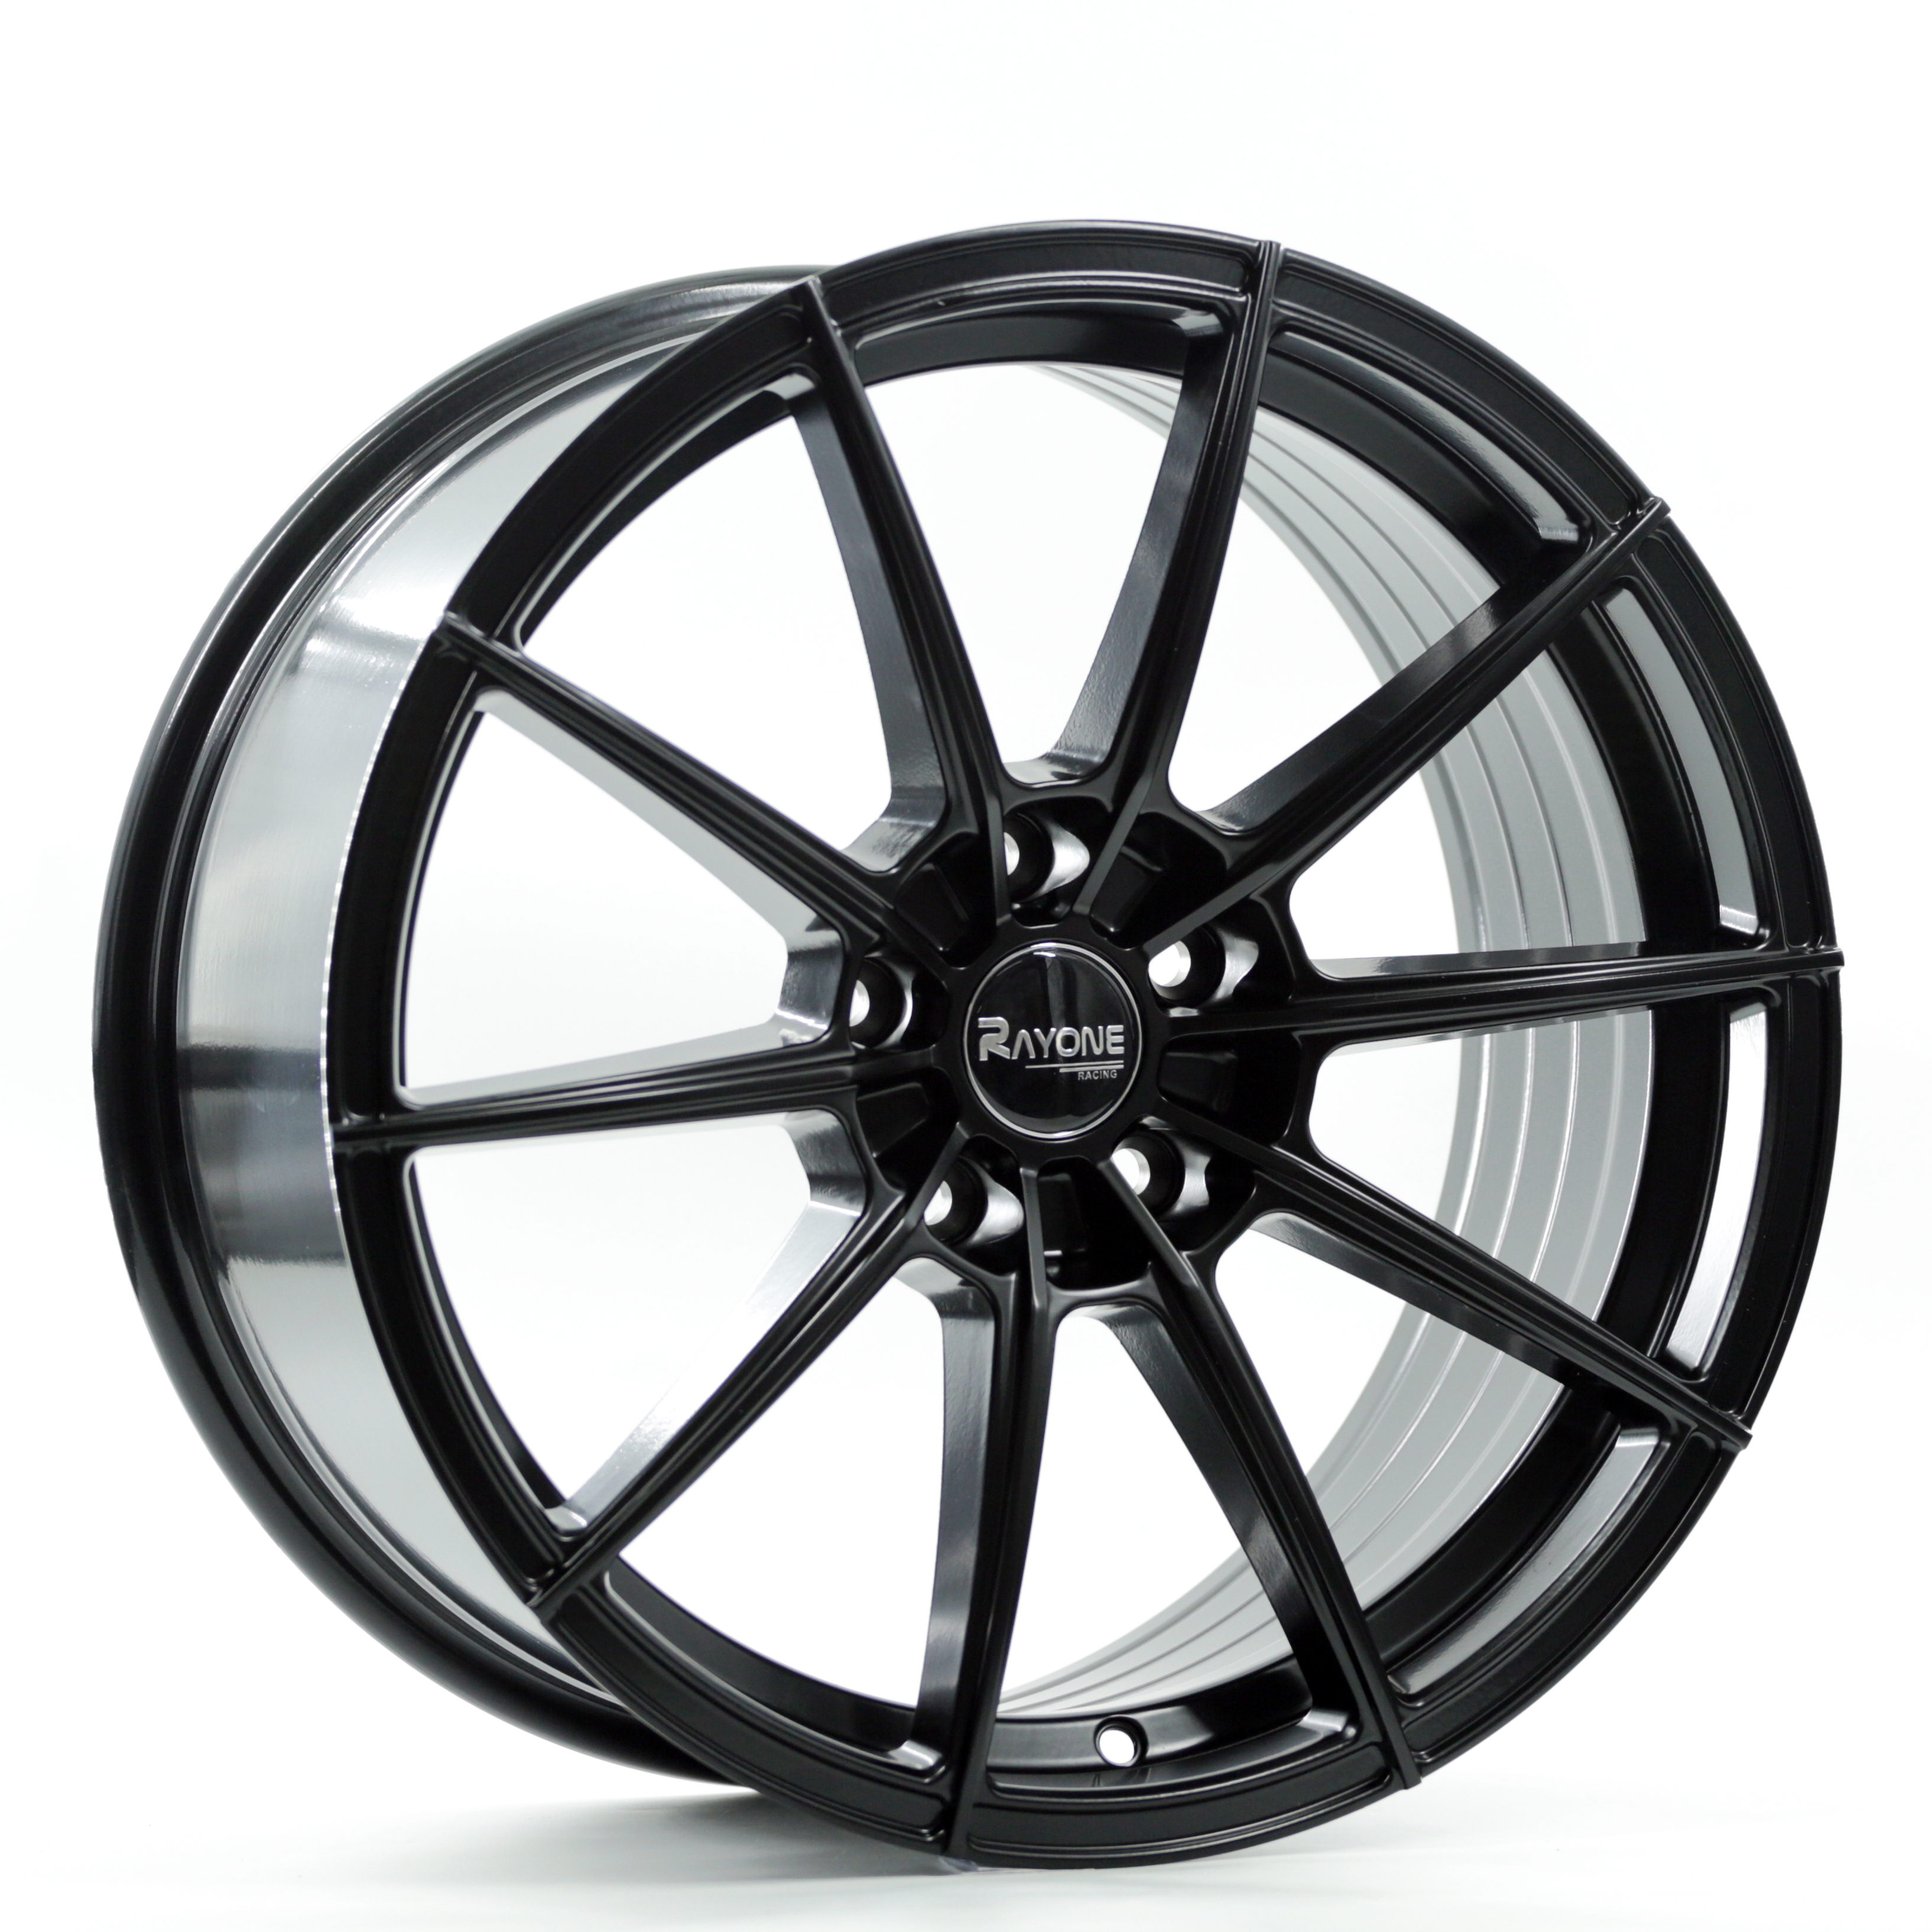 Rayone Factory KS008 18inch Forged Wheels For OEM/ODM